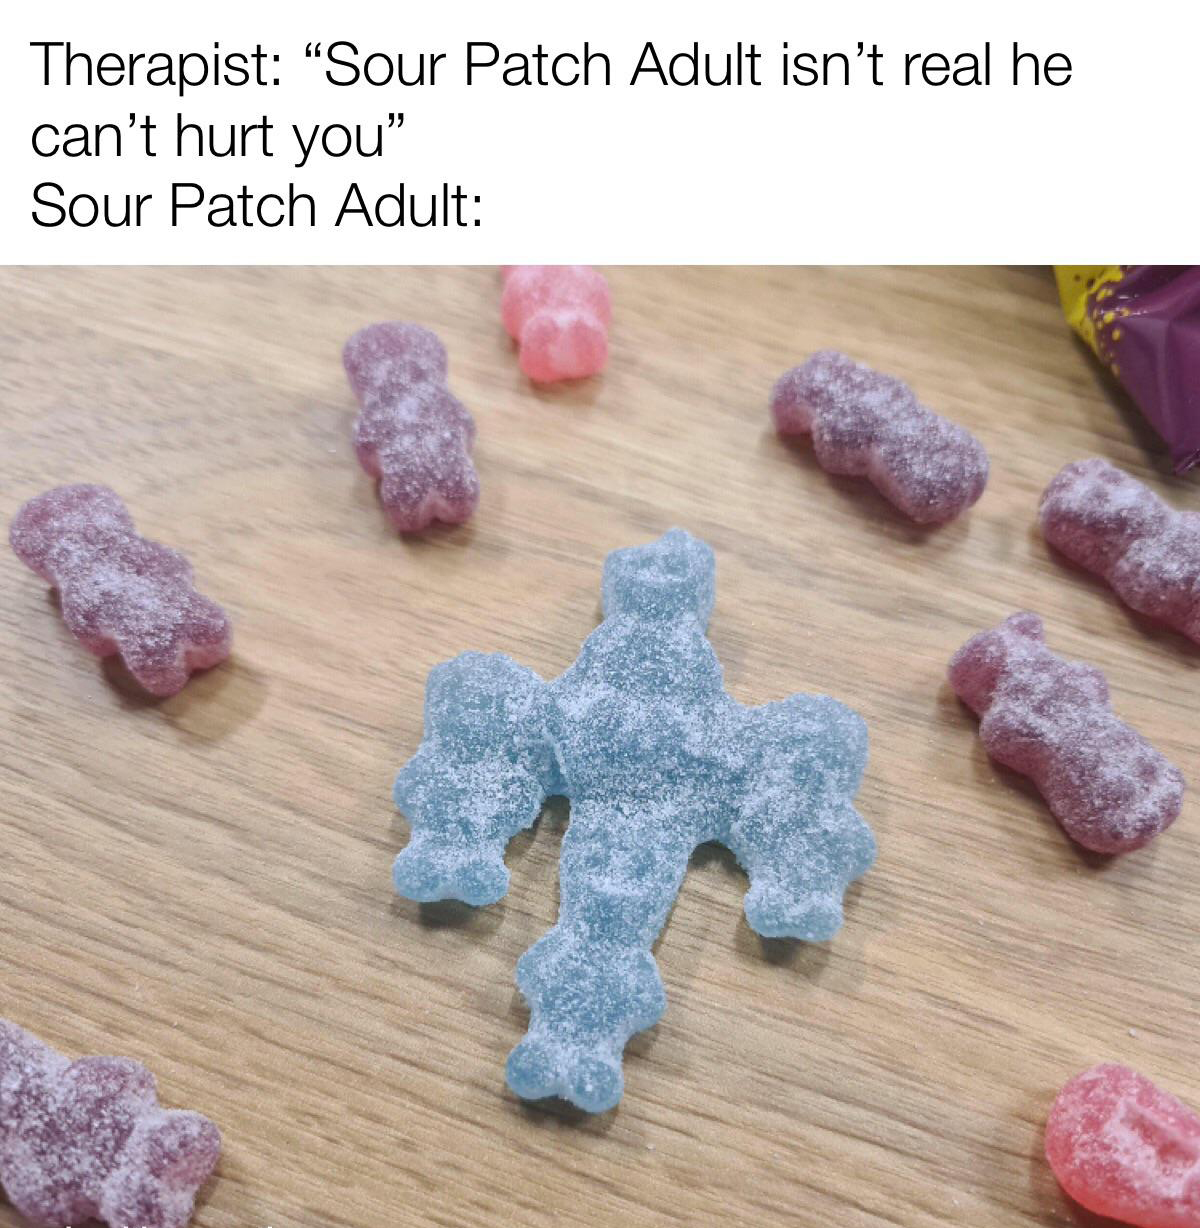 funny memes and pics - Sour Patch Kids - Therapist "Sour Patch Adult isn't real he can't hurt you" Sour Patch Adult